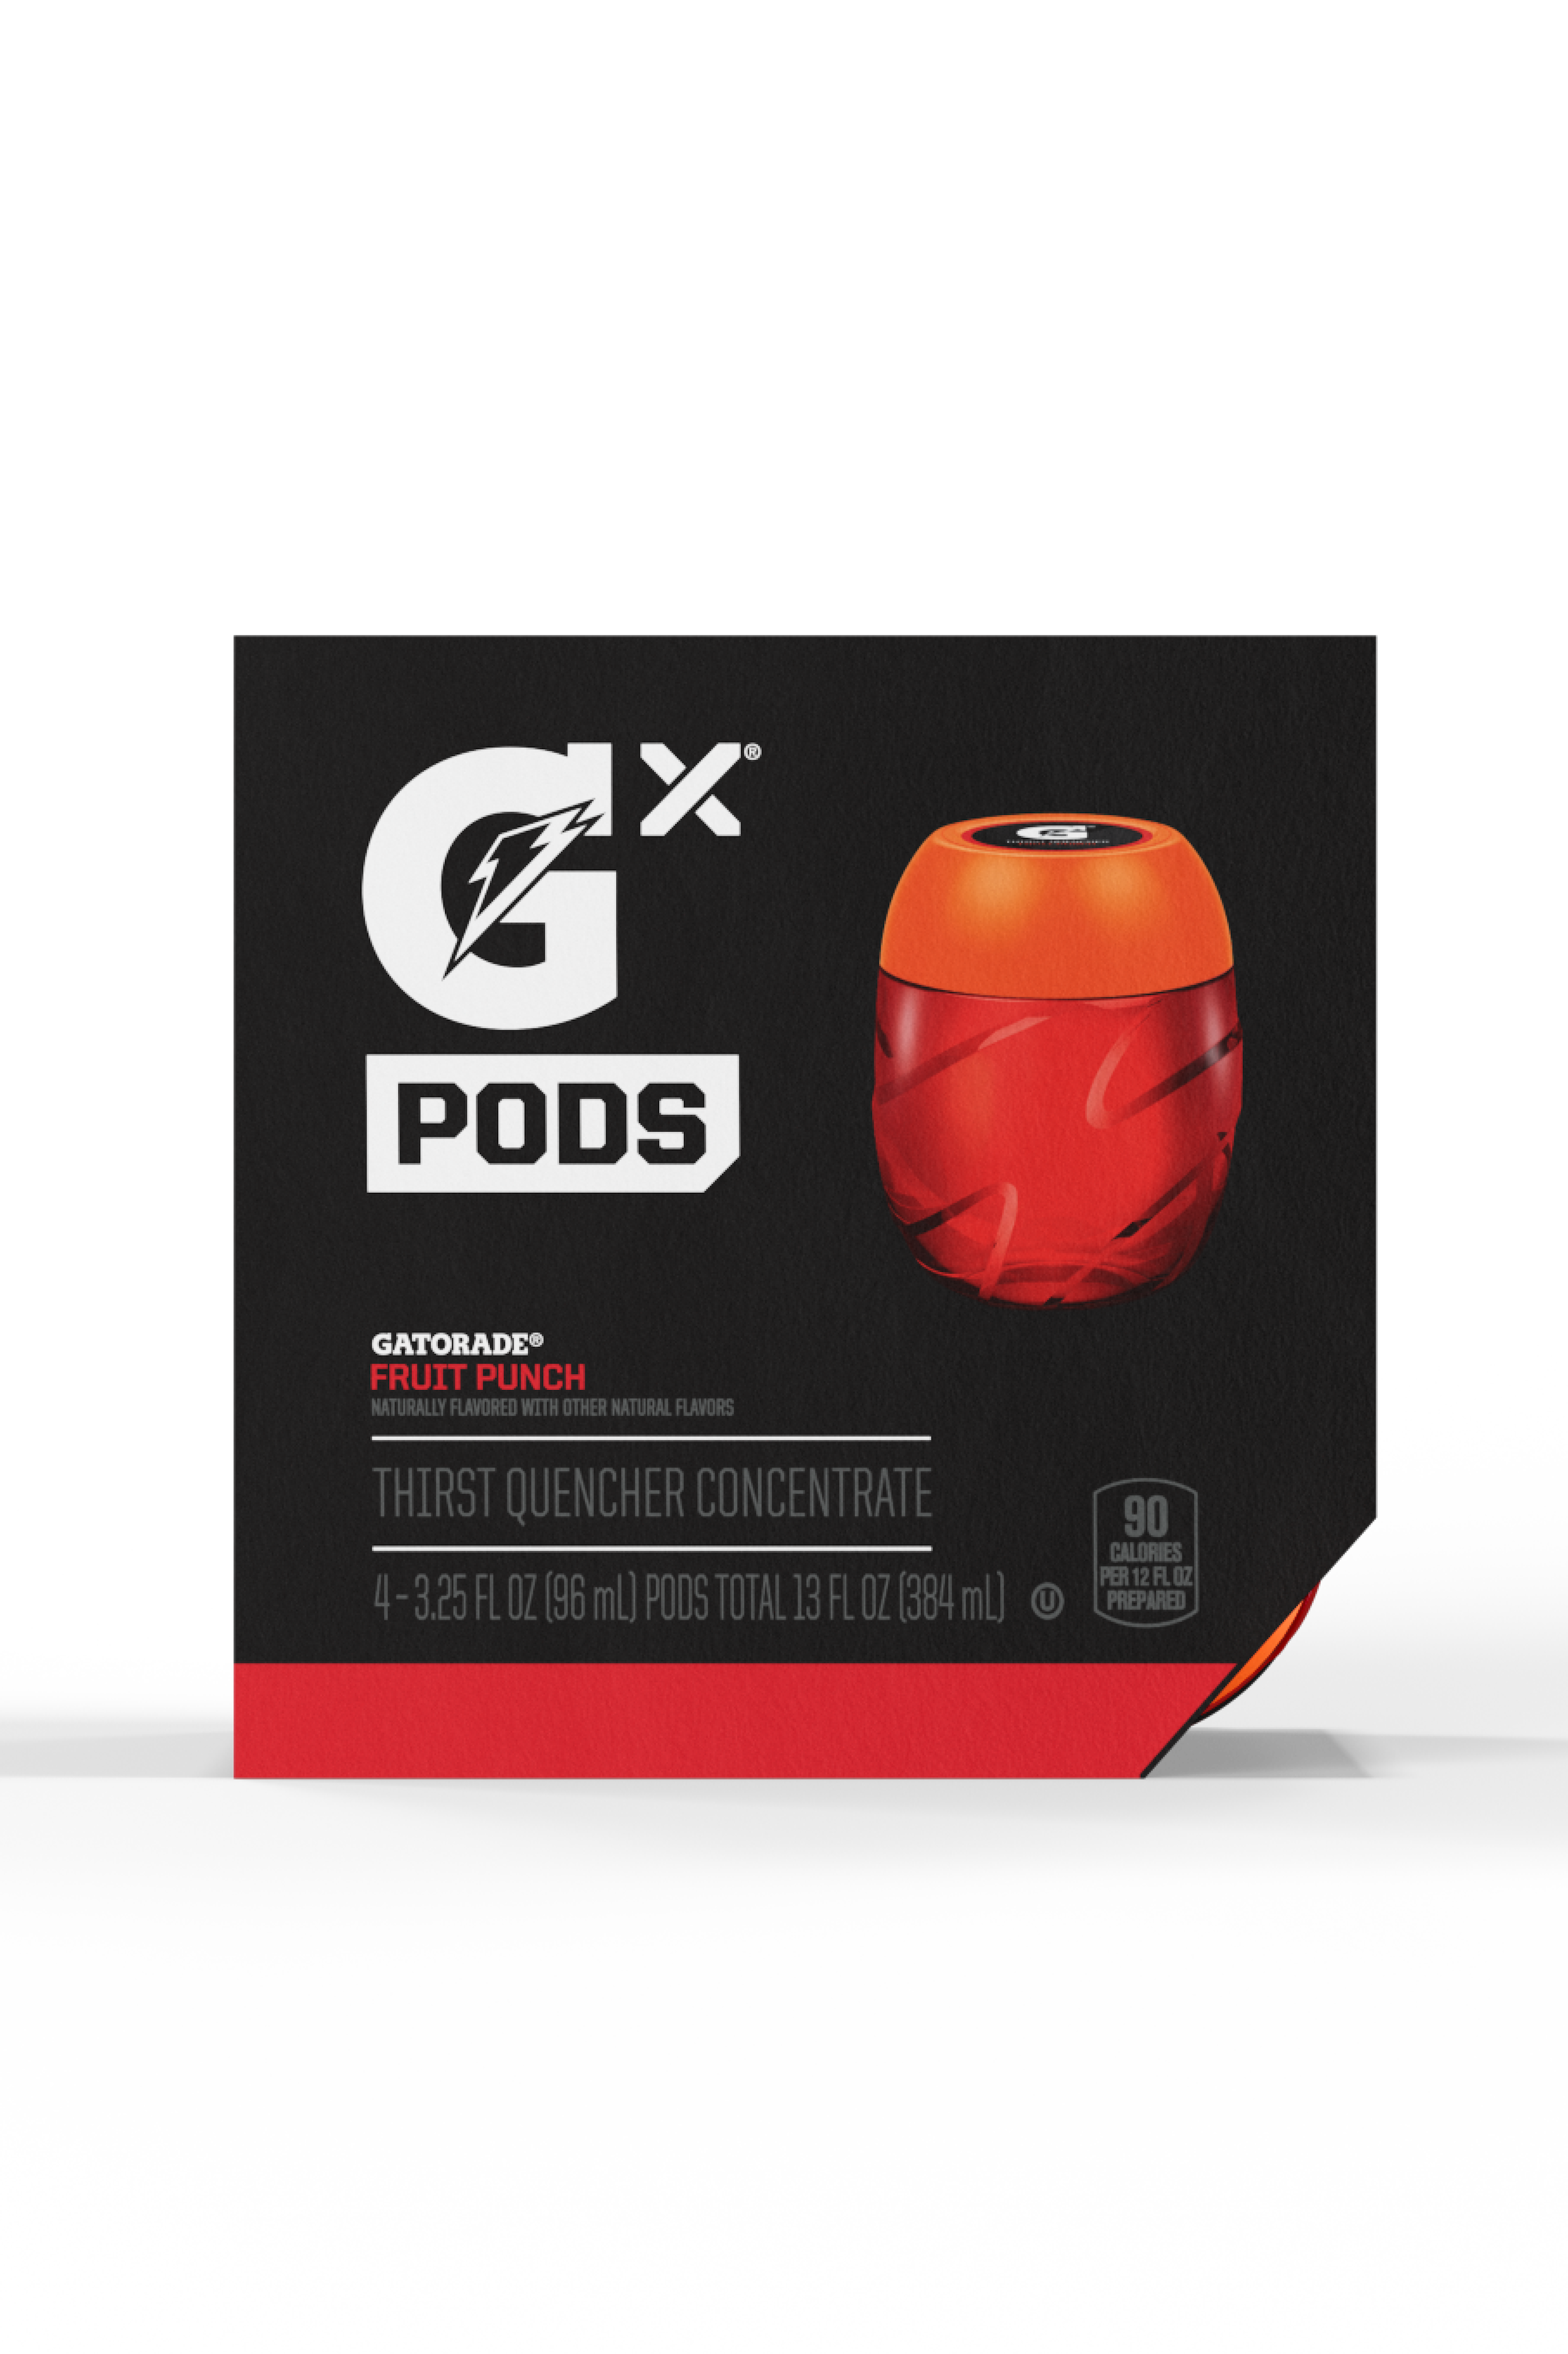 Four pods are in each package